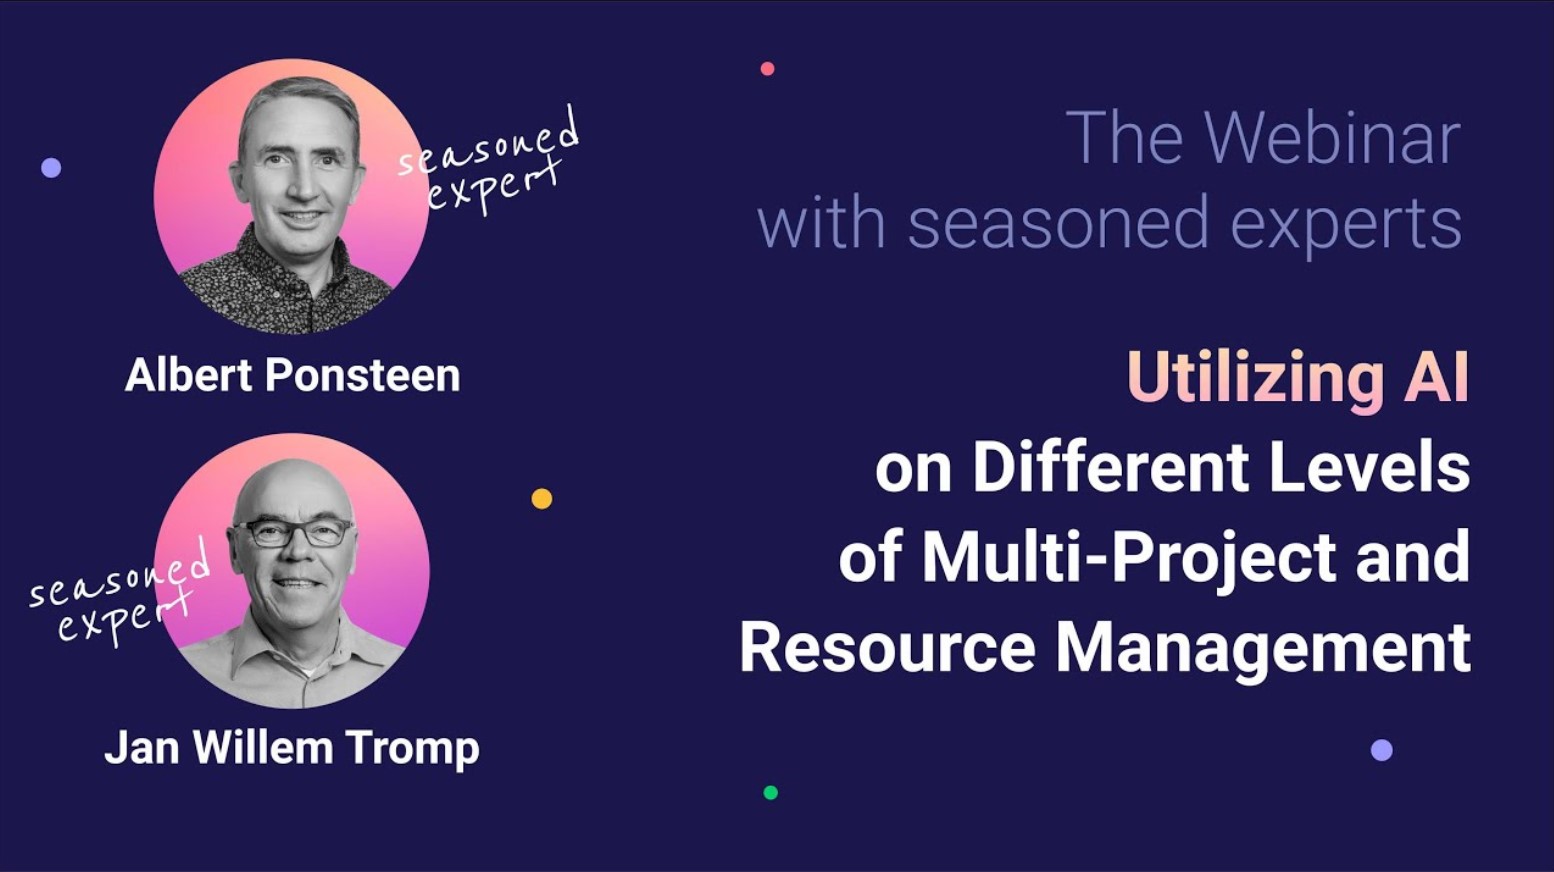 Utilizing AI on Different Levels of Multi-Project and Resource Management